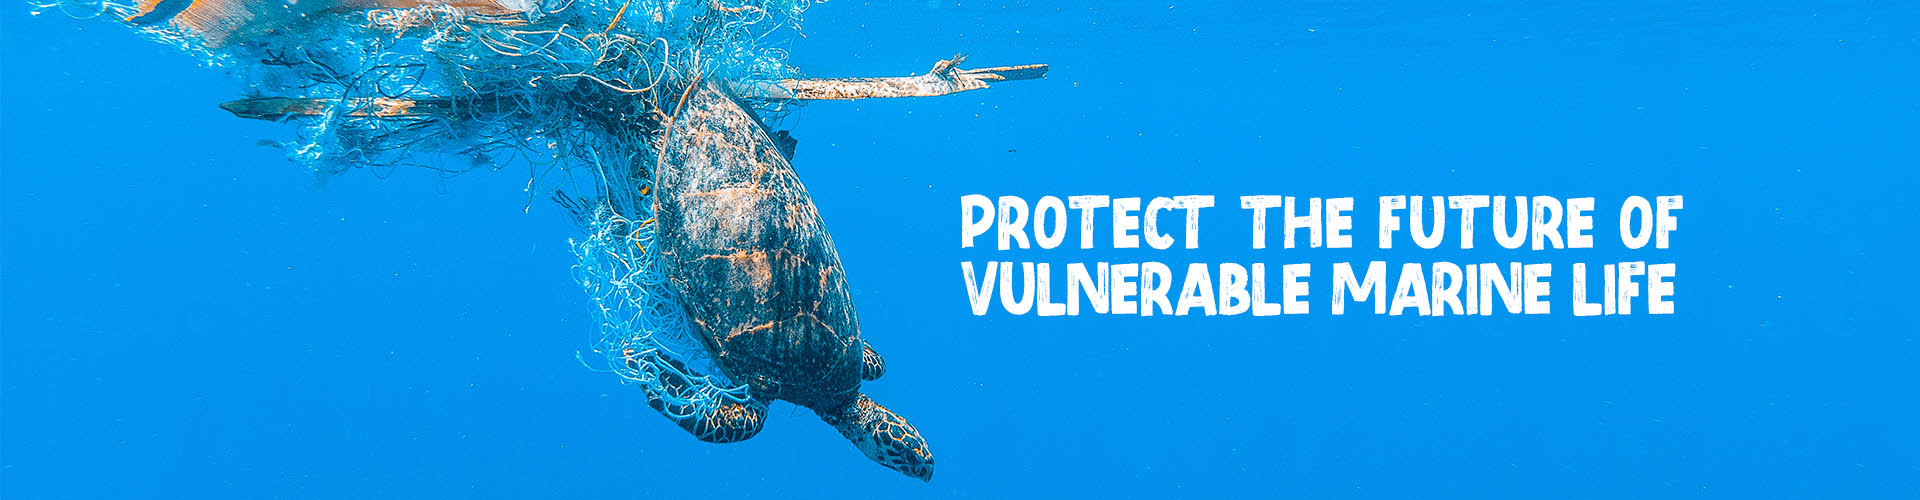 Protect the future of vulnerable marine life